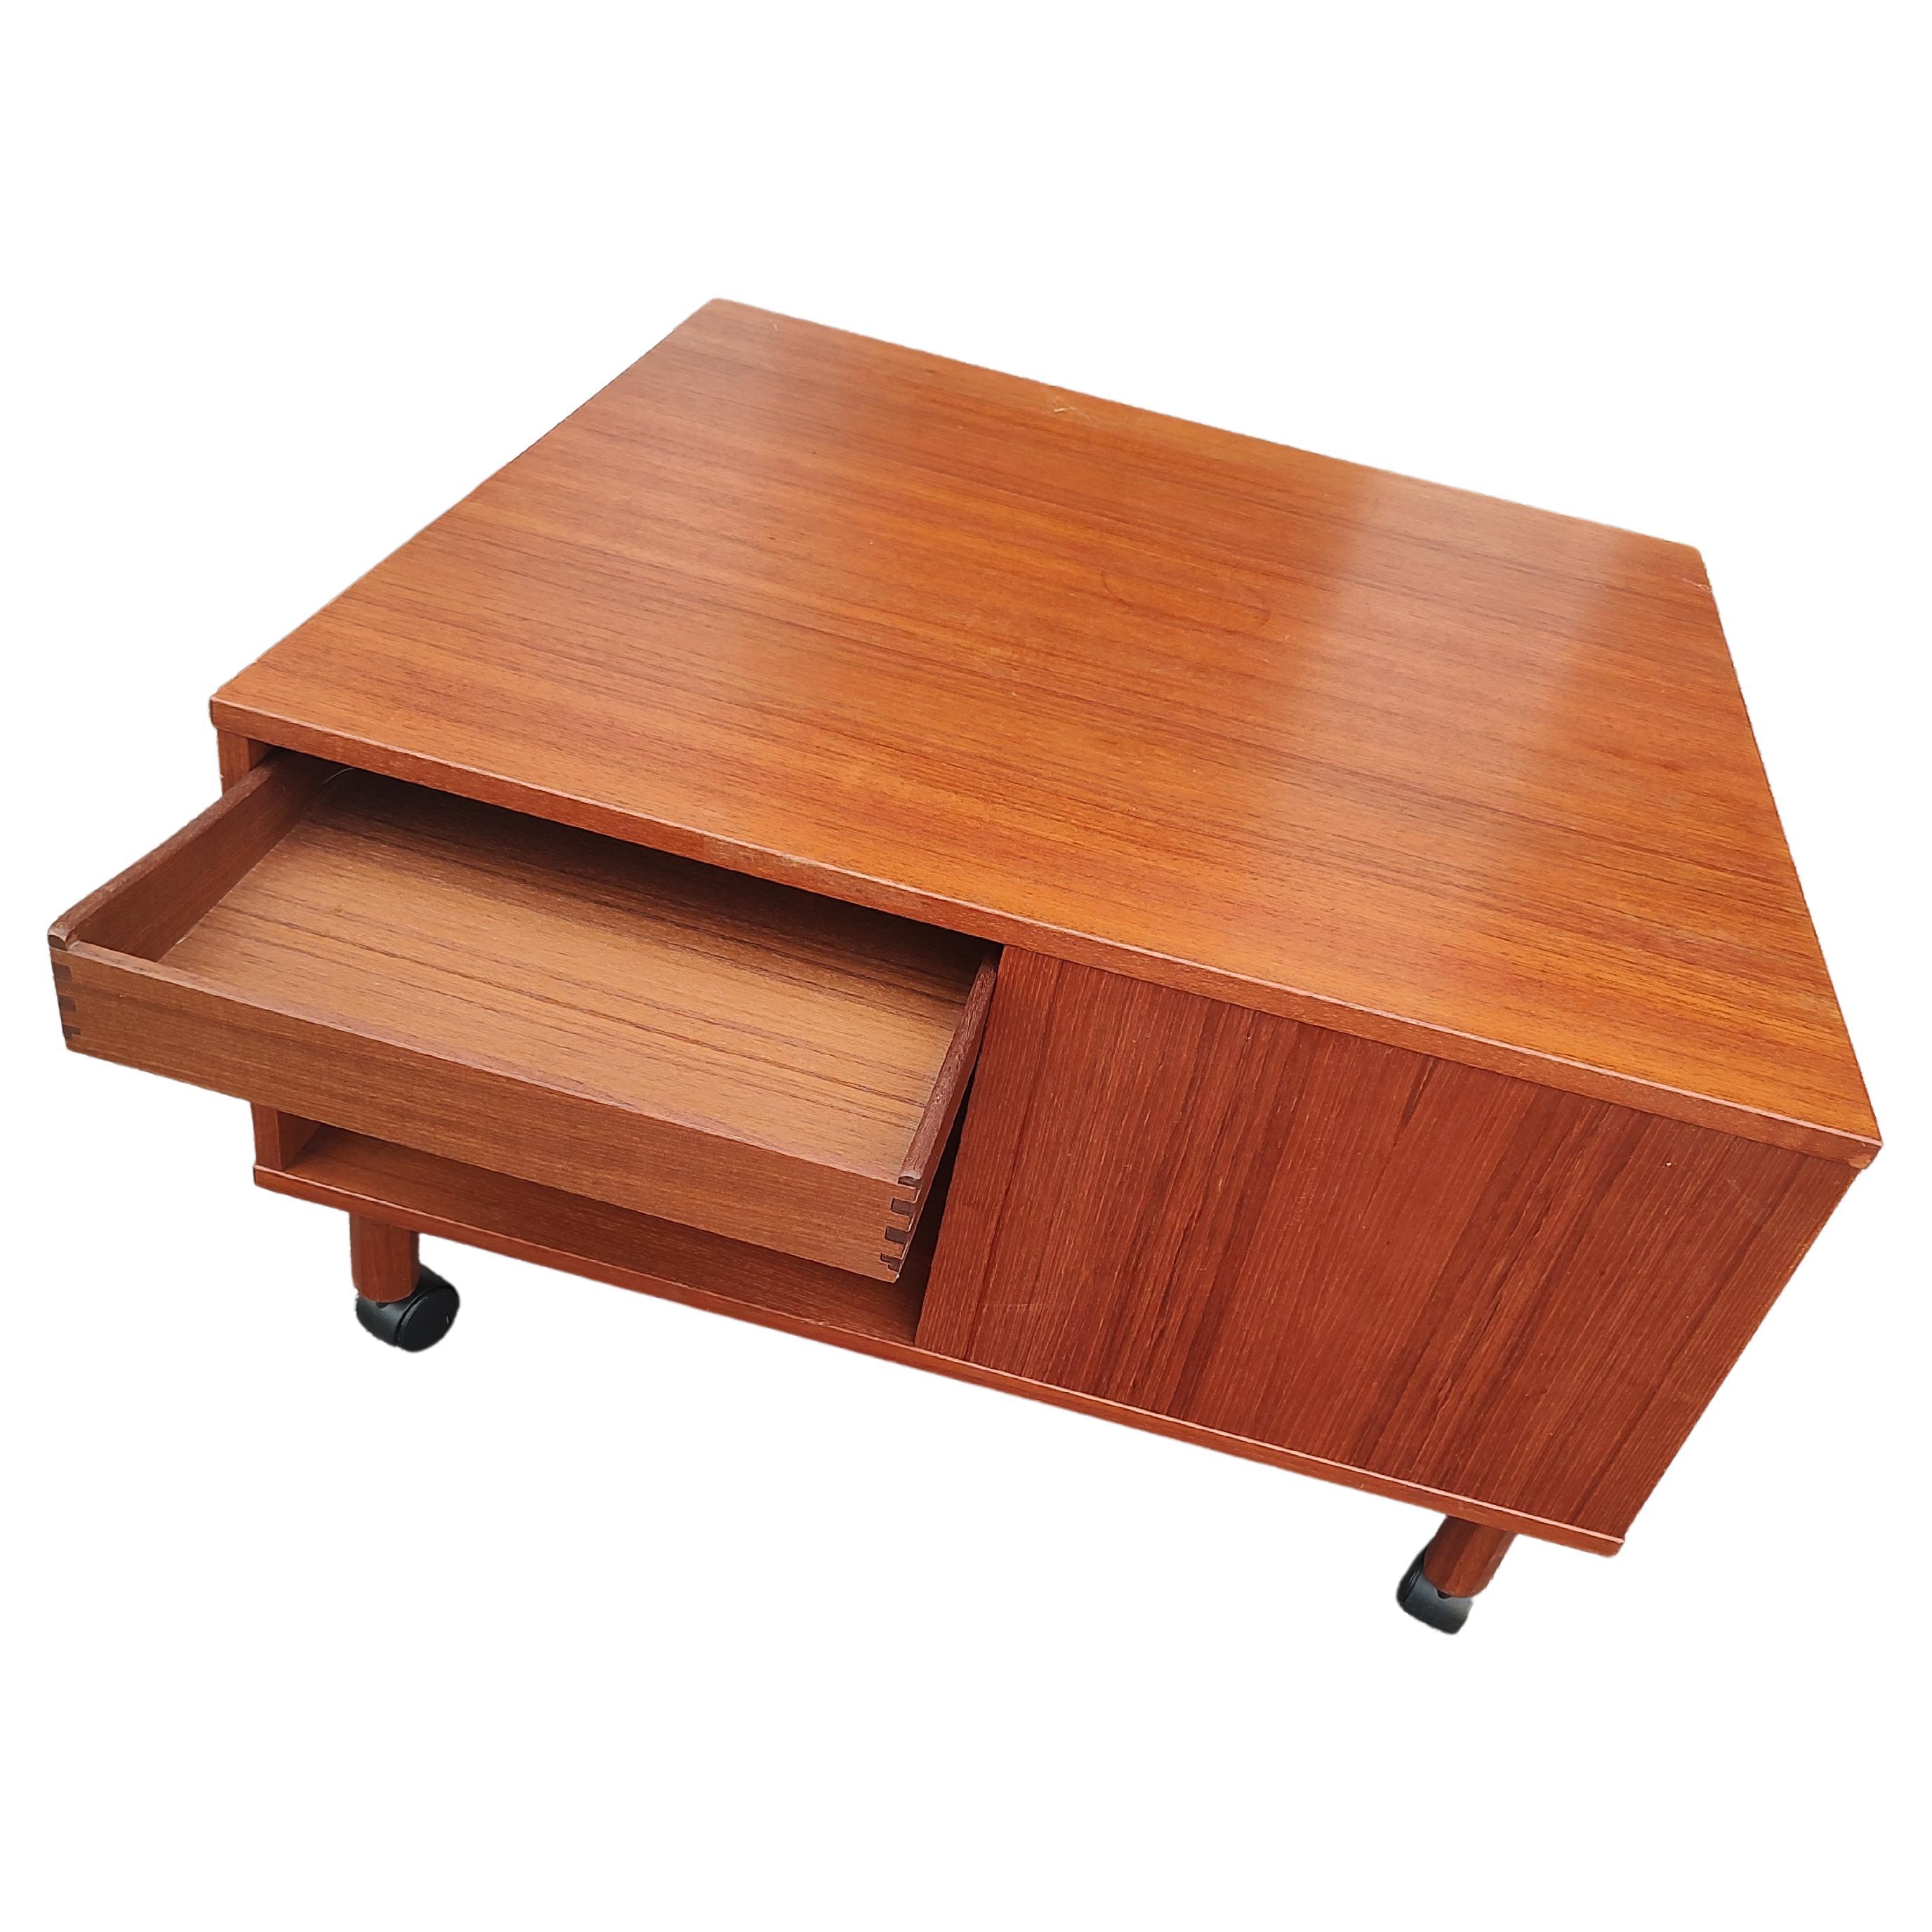 Fabulous and versatile teak cocktail table with a drawer on one side a cutting board on another side a pullout writing slot and a magazine rack on the last side. All functional viable accessories to accommodate your needs. In excellent vintage